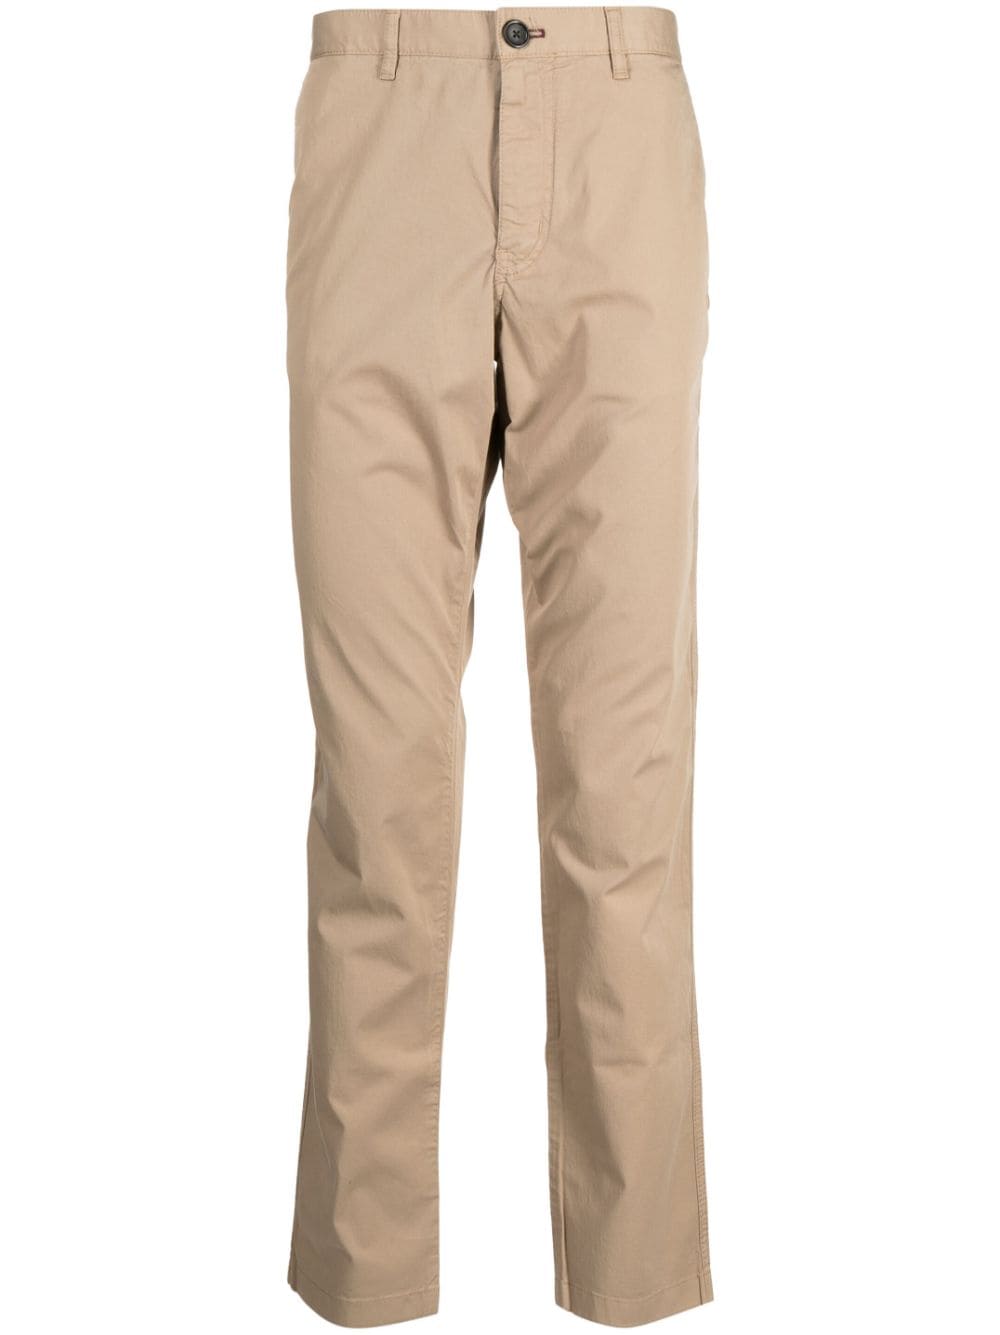 PS BY PAUL SMITH LOGO-PATCH COTTON CHINOS